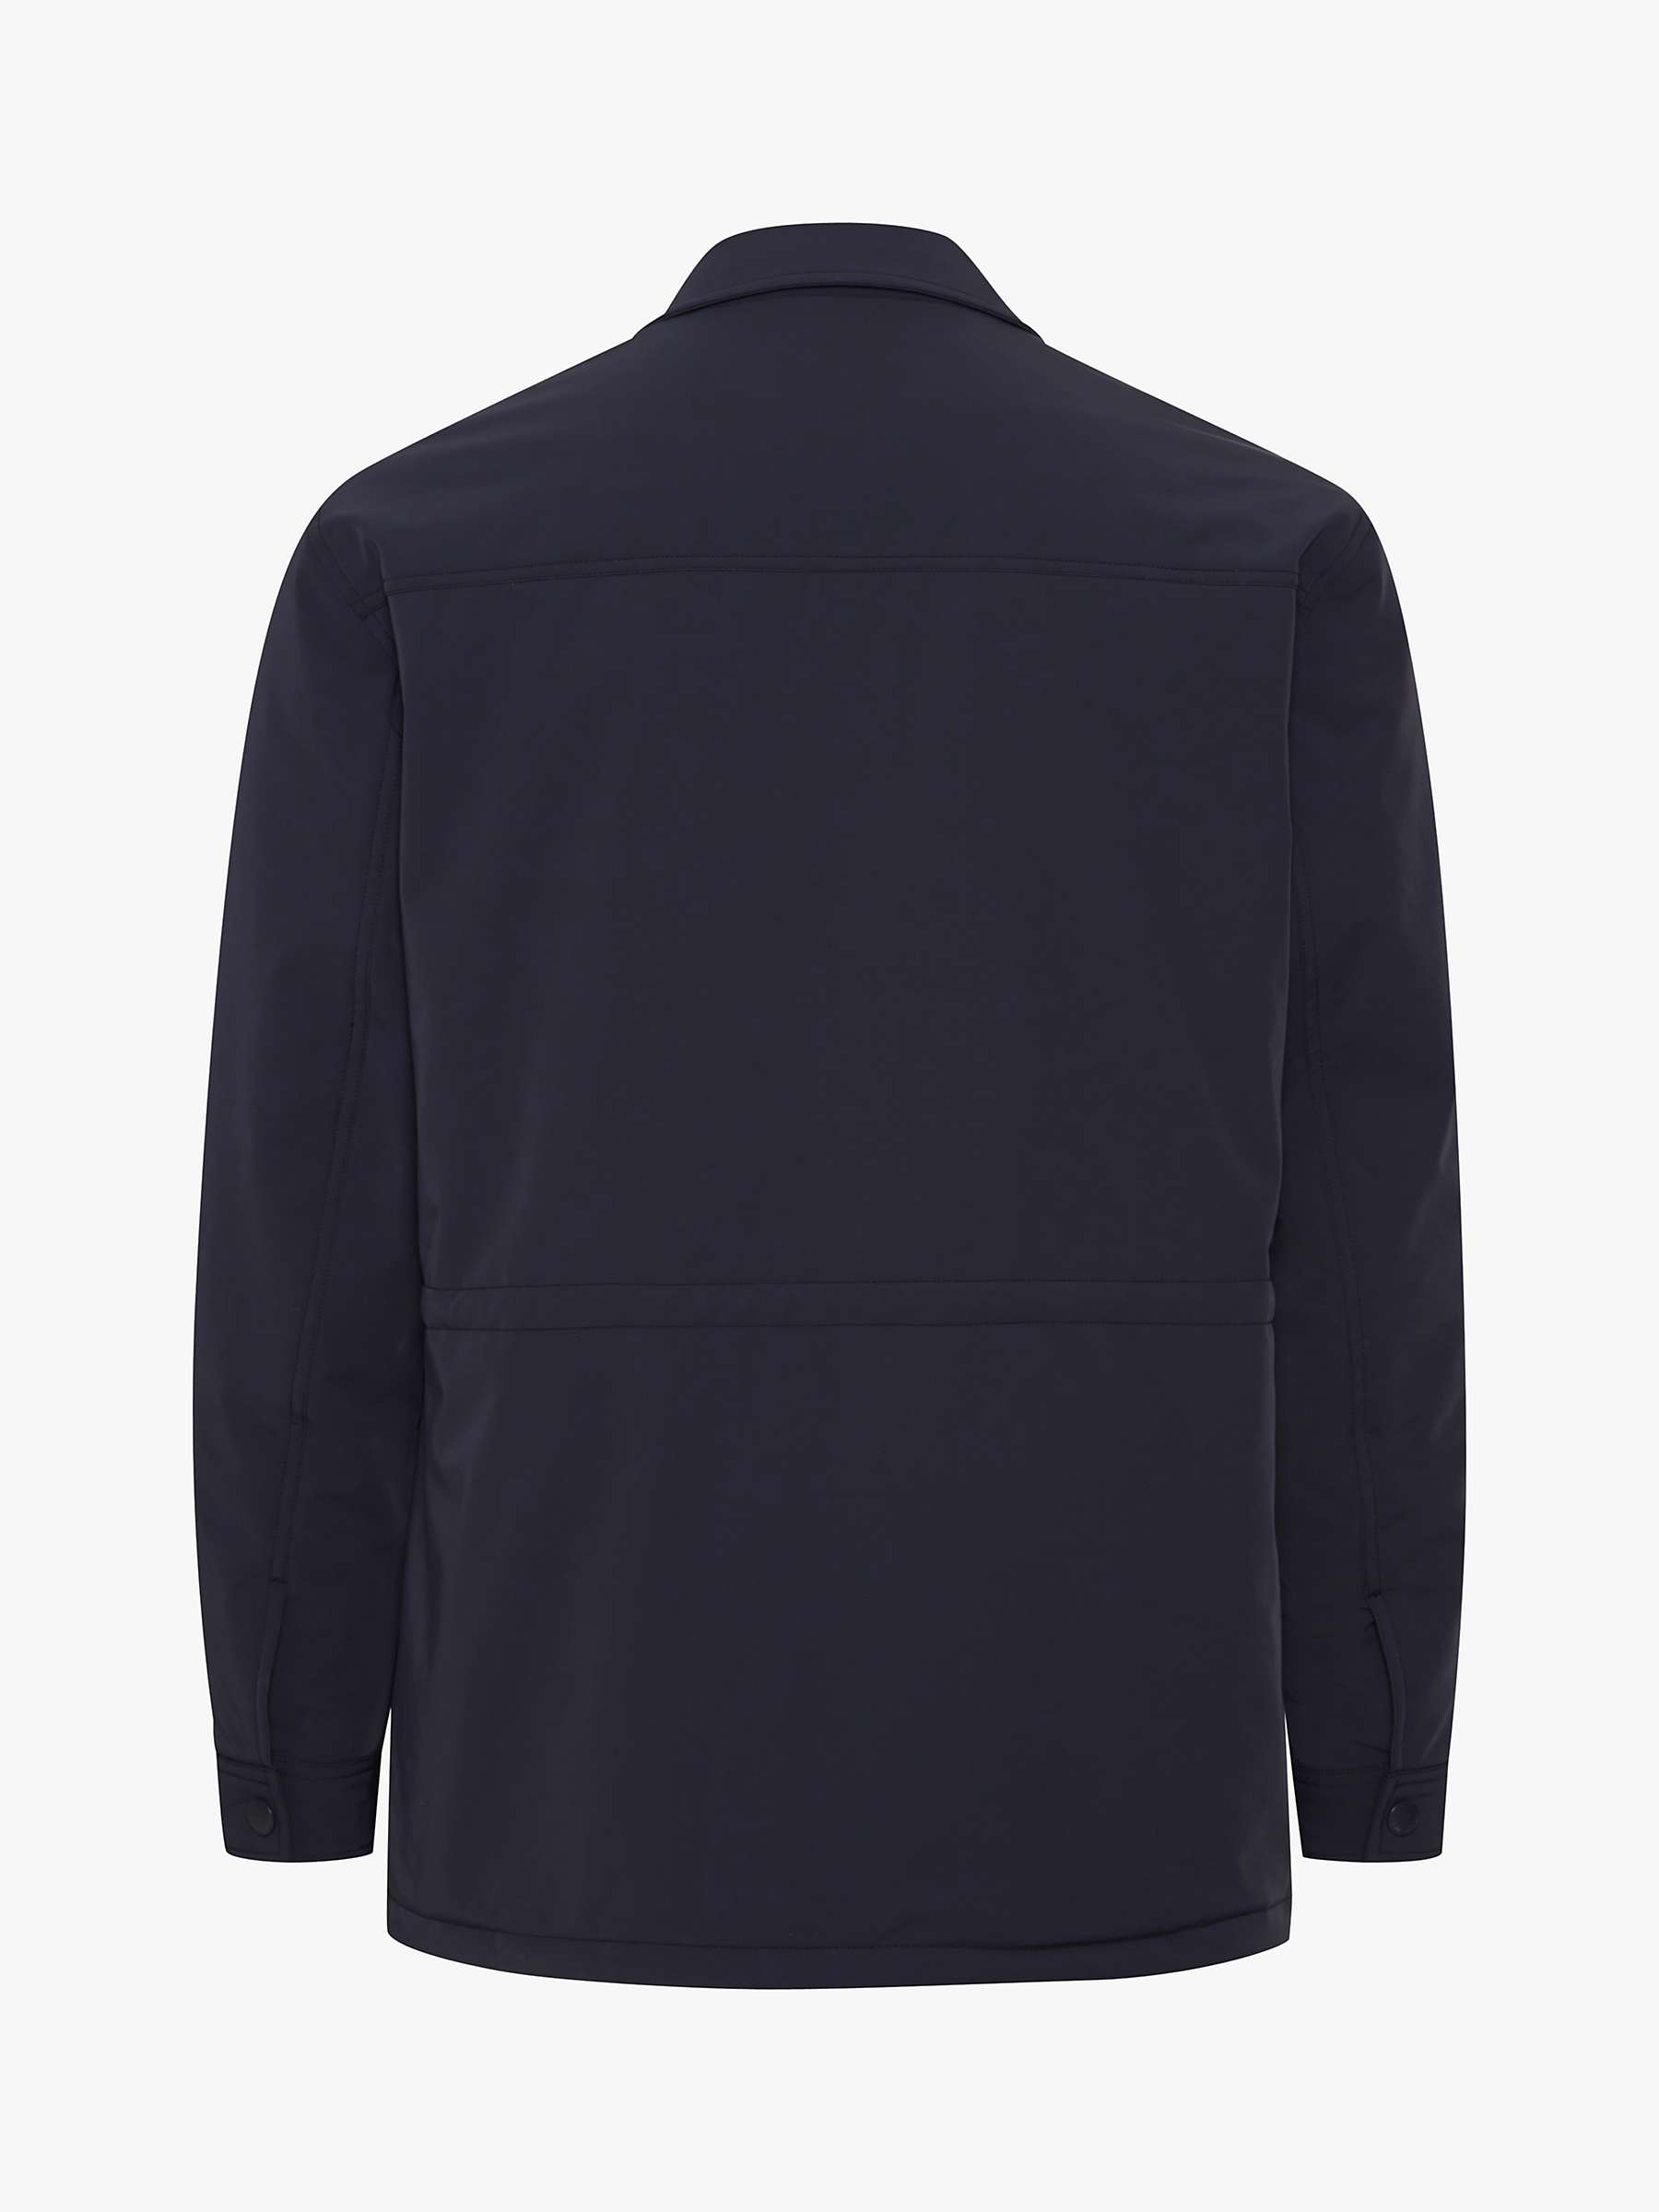 Buy Casual Friday Ortiz M65 Utility Jacket, Navy Online at johnlewis.com